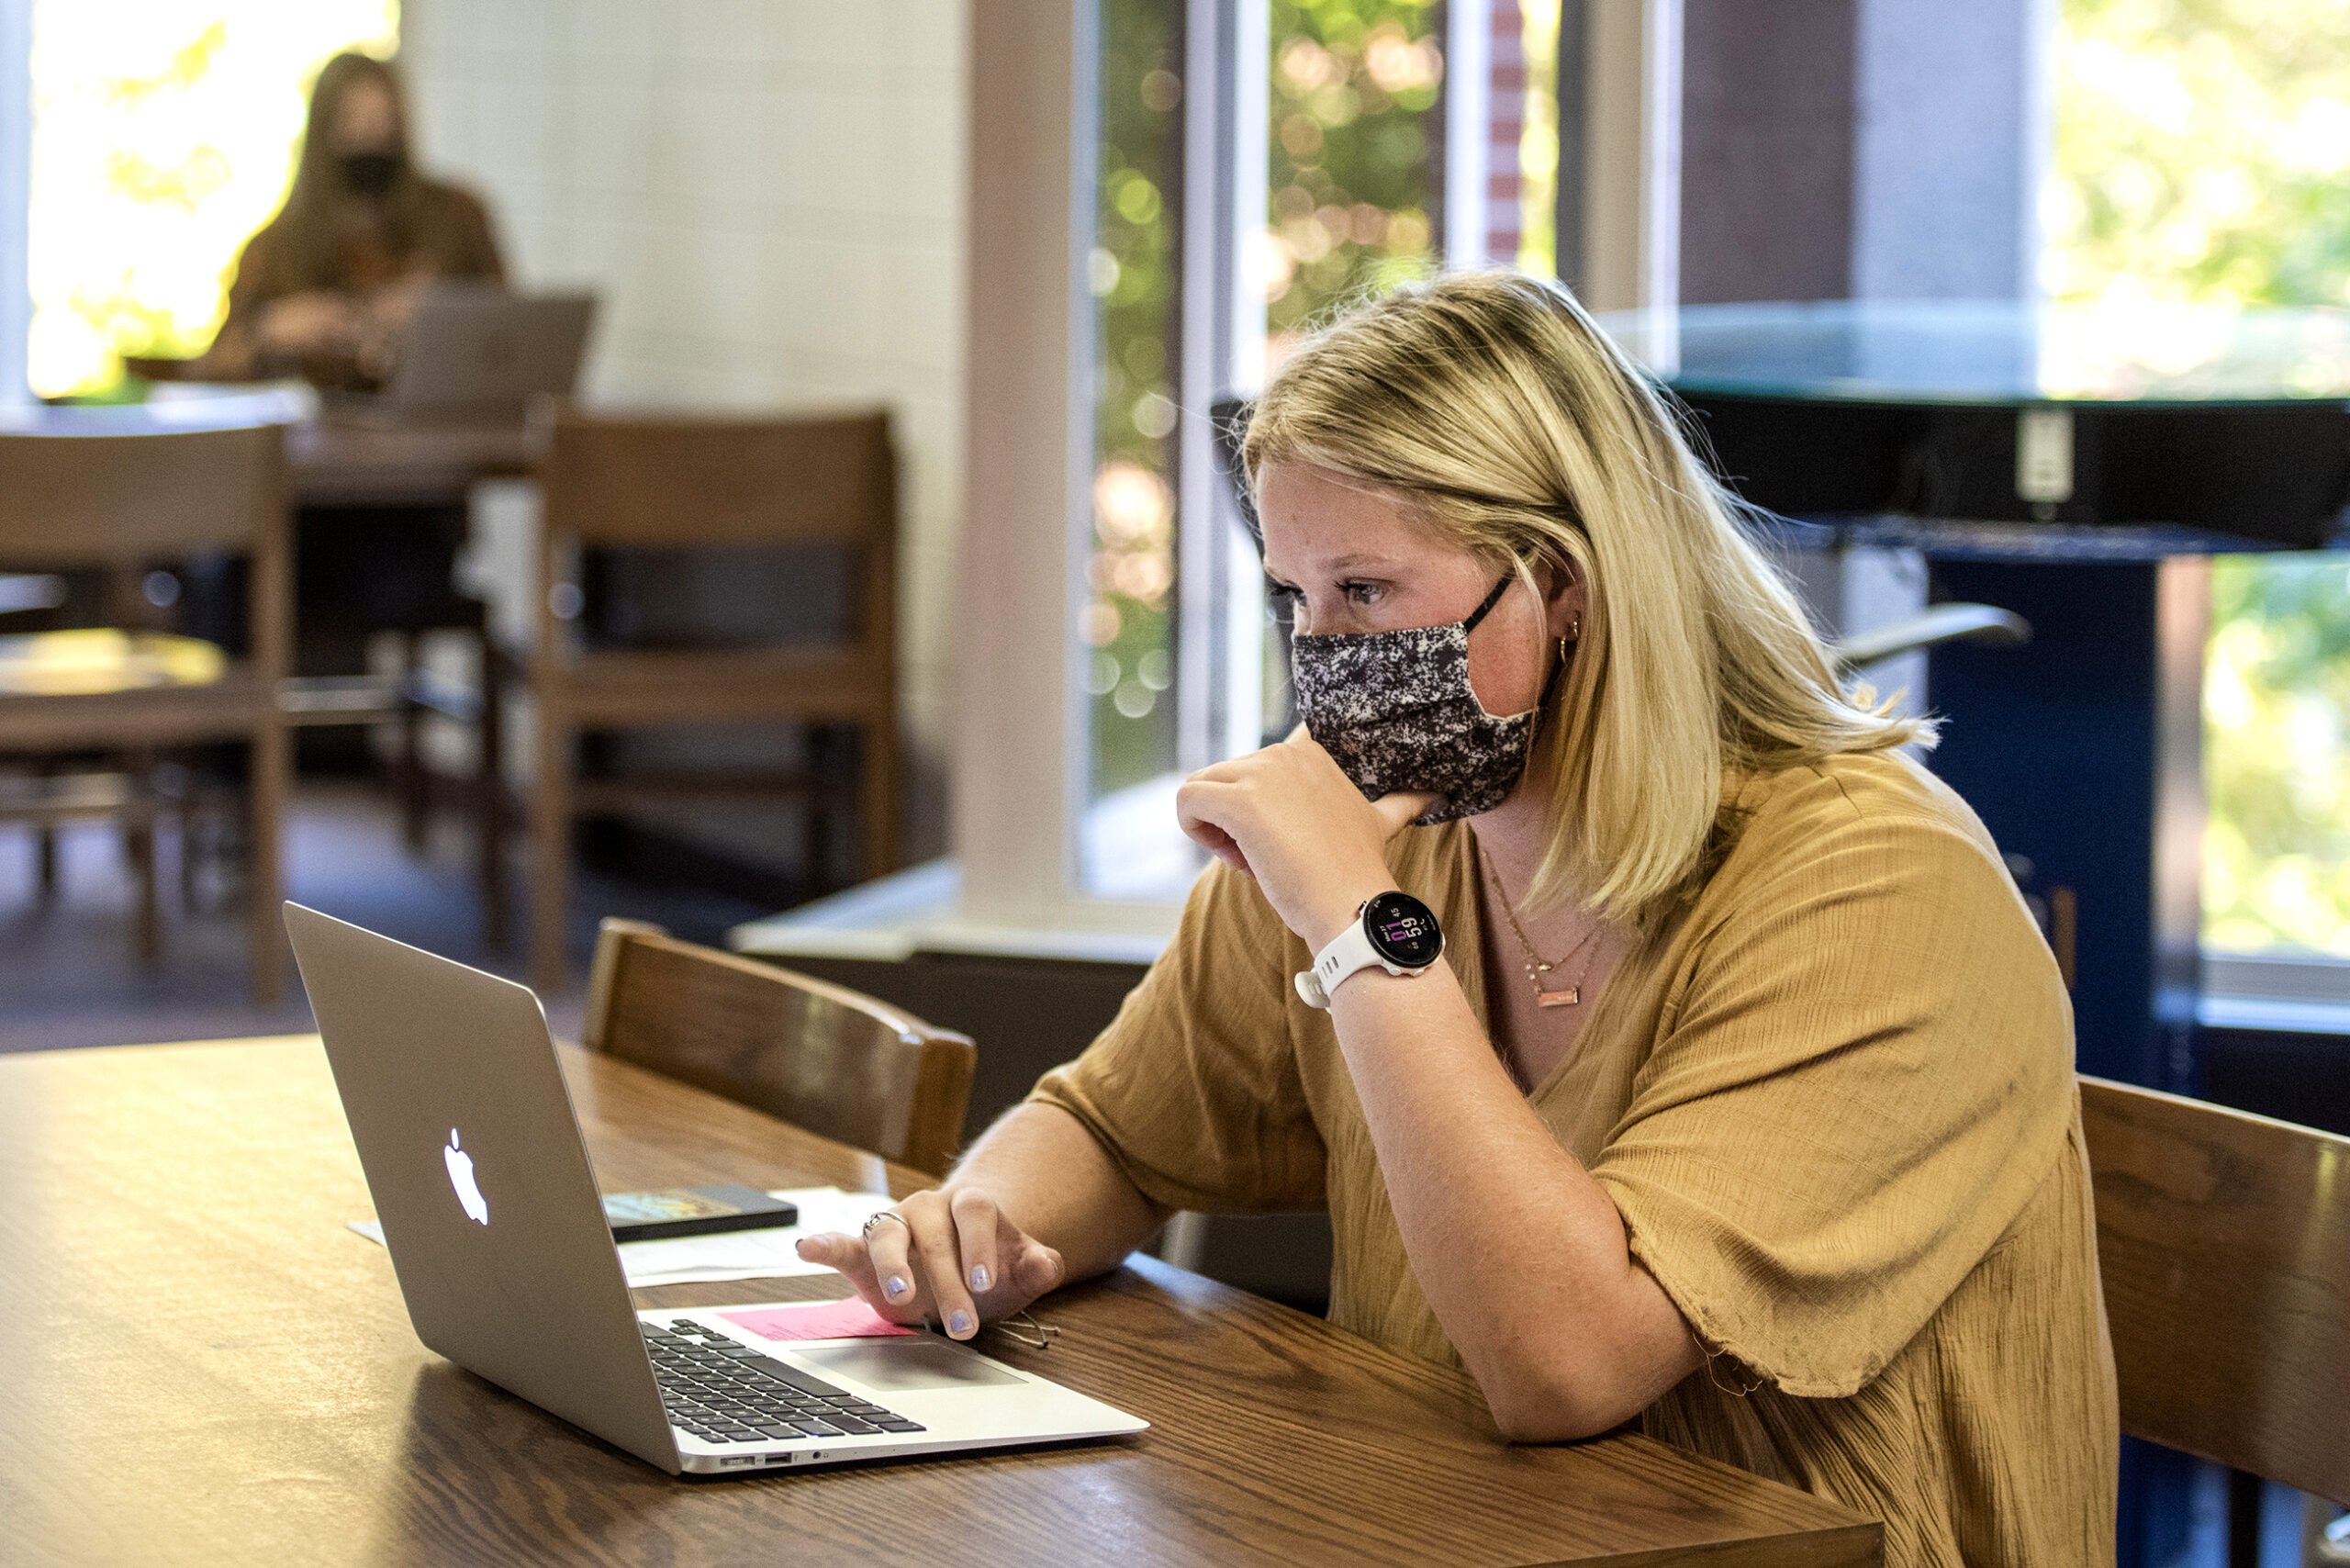 A student wears a face mask as she works on a laptop in the library.